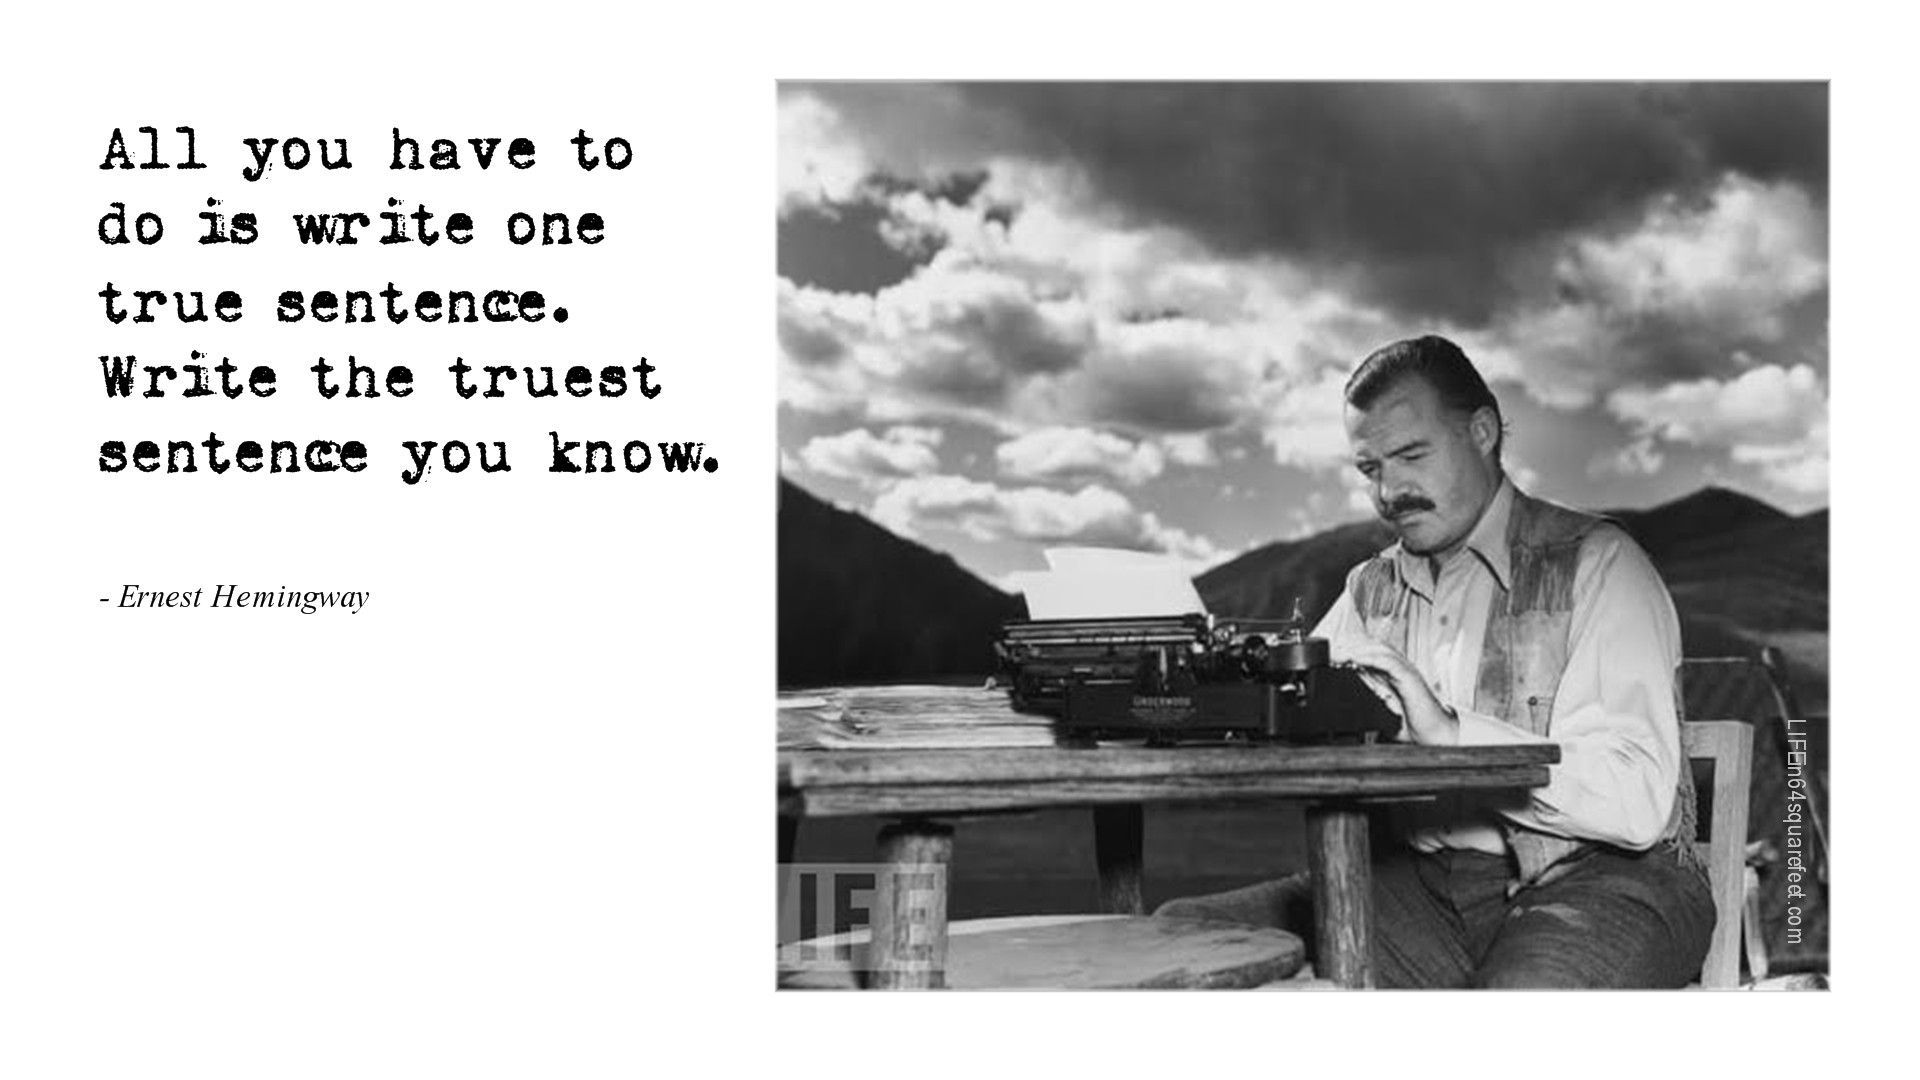 Ernest Hemingway Quote Wallpaper  Background Wallpapers